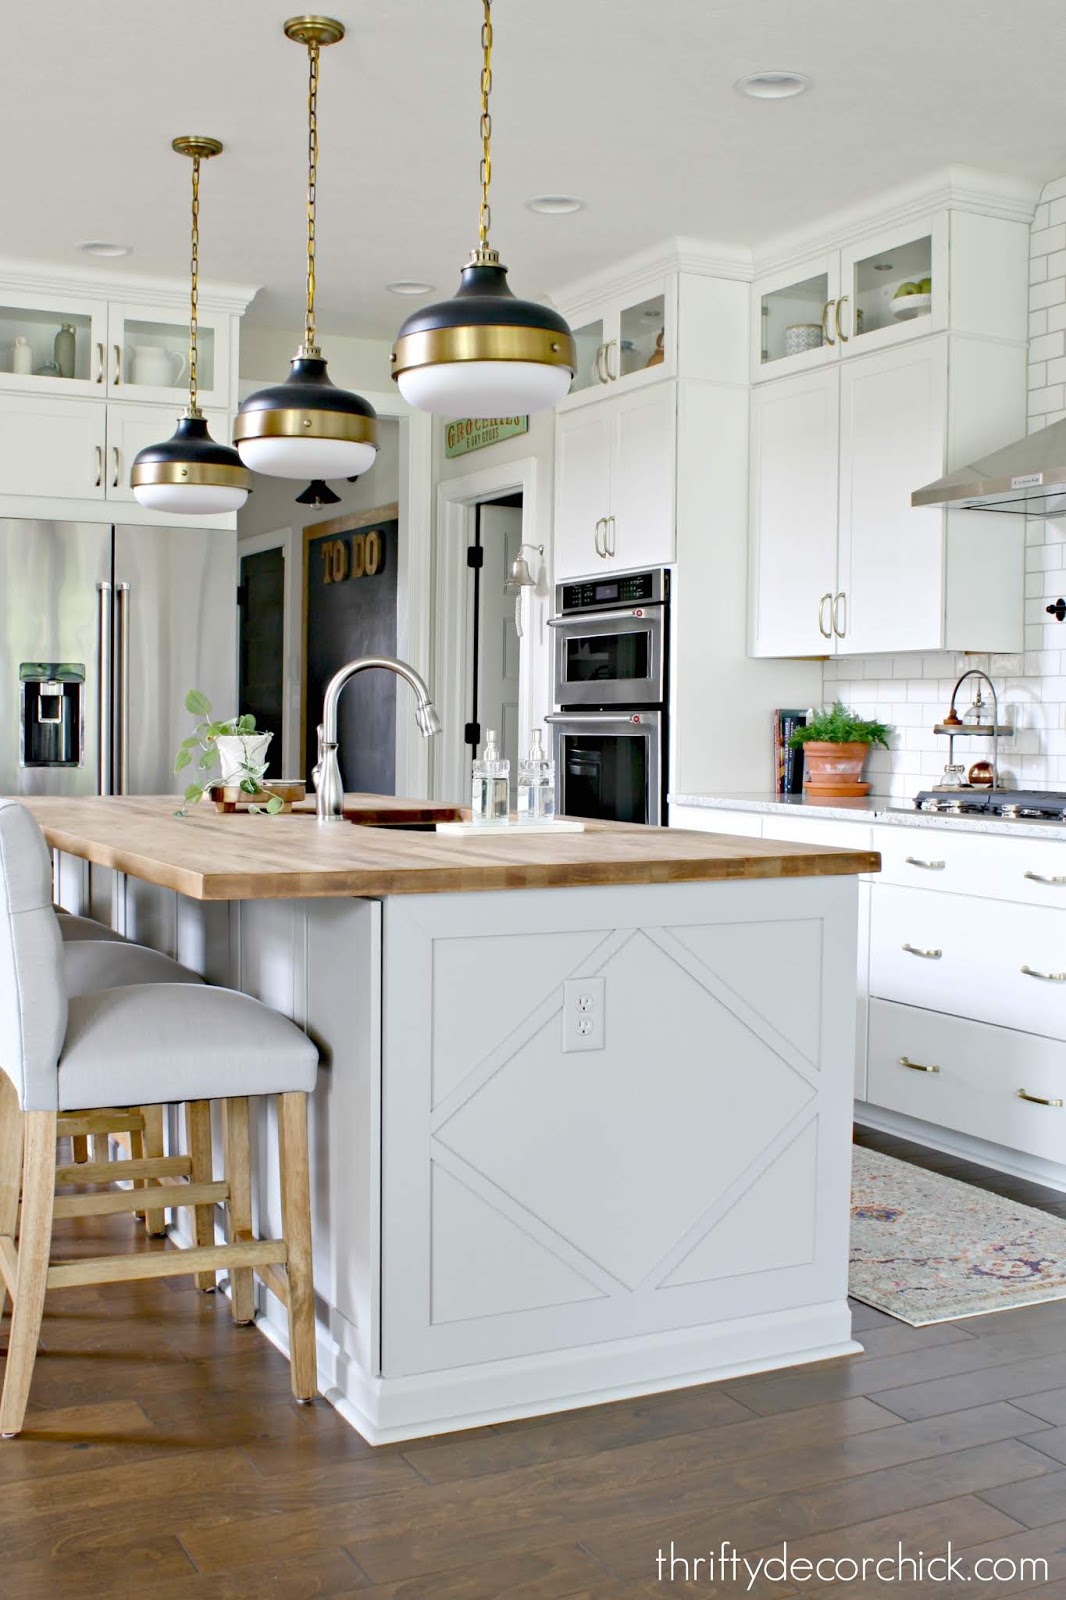 How to customize a plain kitchen island with side panels - GRACE IN SPACE